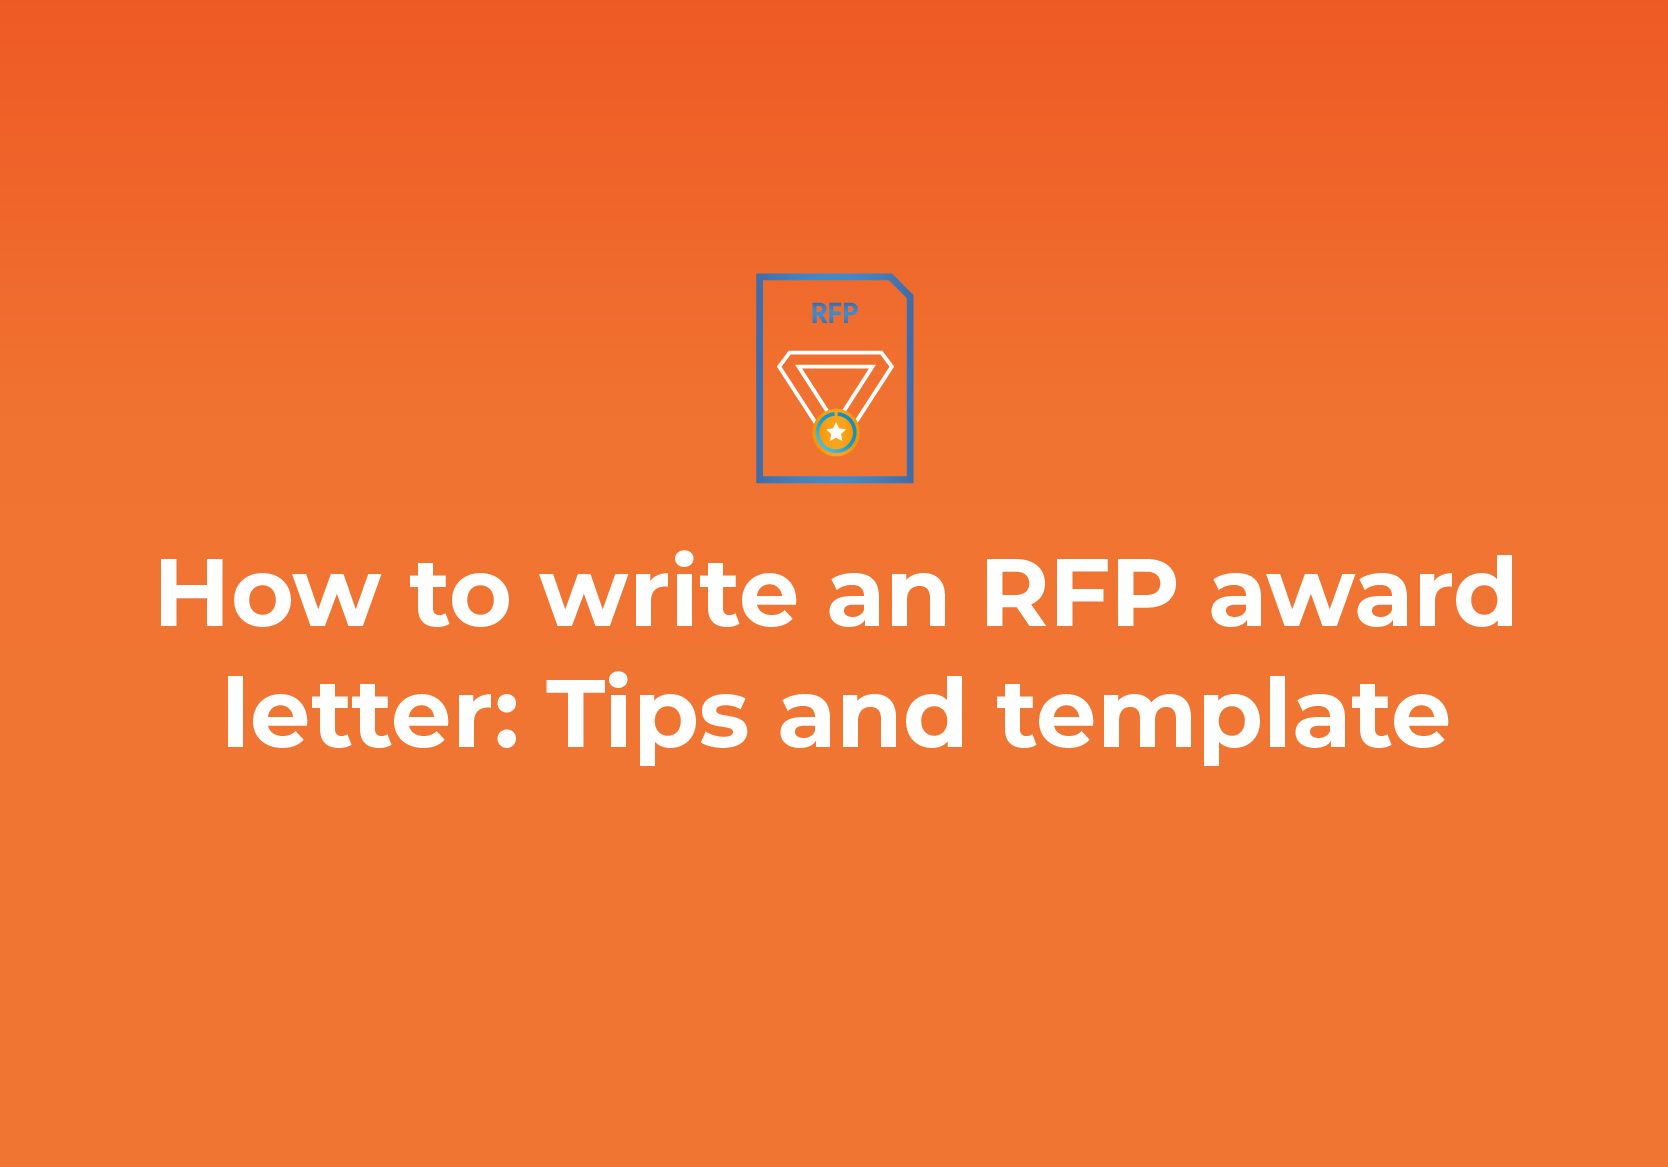 How to write an RFP award letter: Tips and template